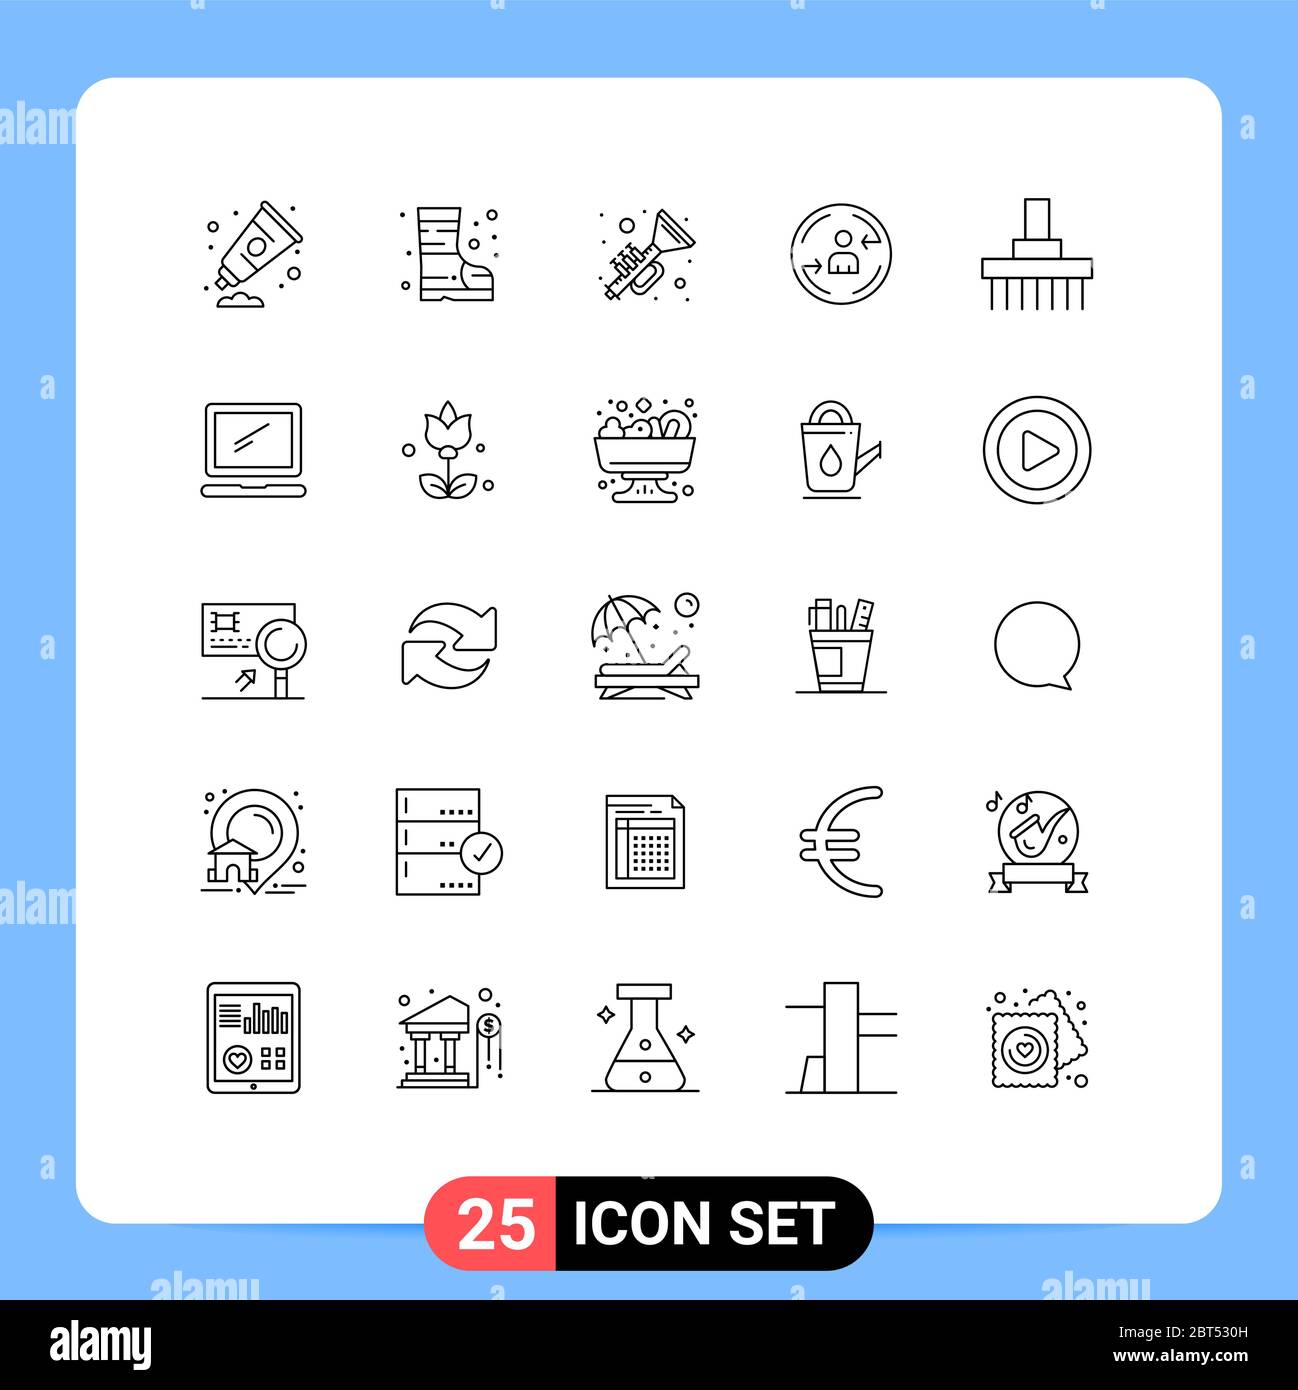 Set of 25 Modern UI Icons Symbols Signs for front, combine, ireland, marketing, visiter Editable Vector Design Elements Stock Vector